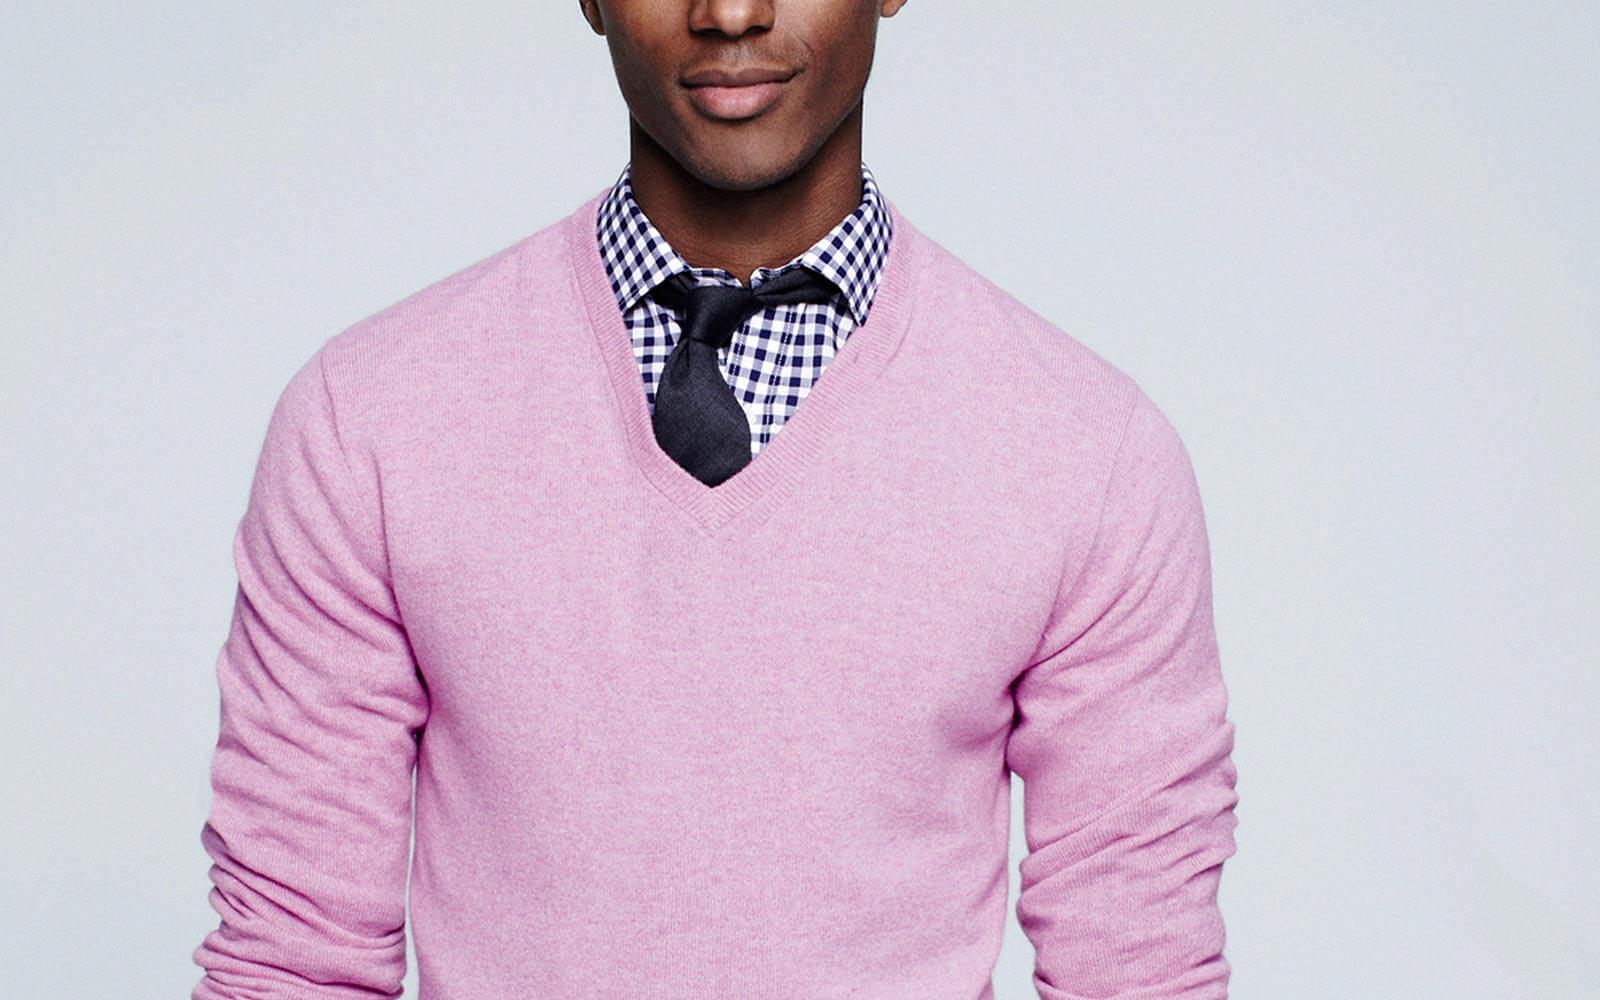 man wearing pink v-neck sweater over a shirt and tie